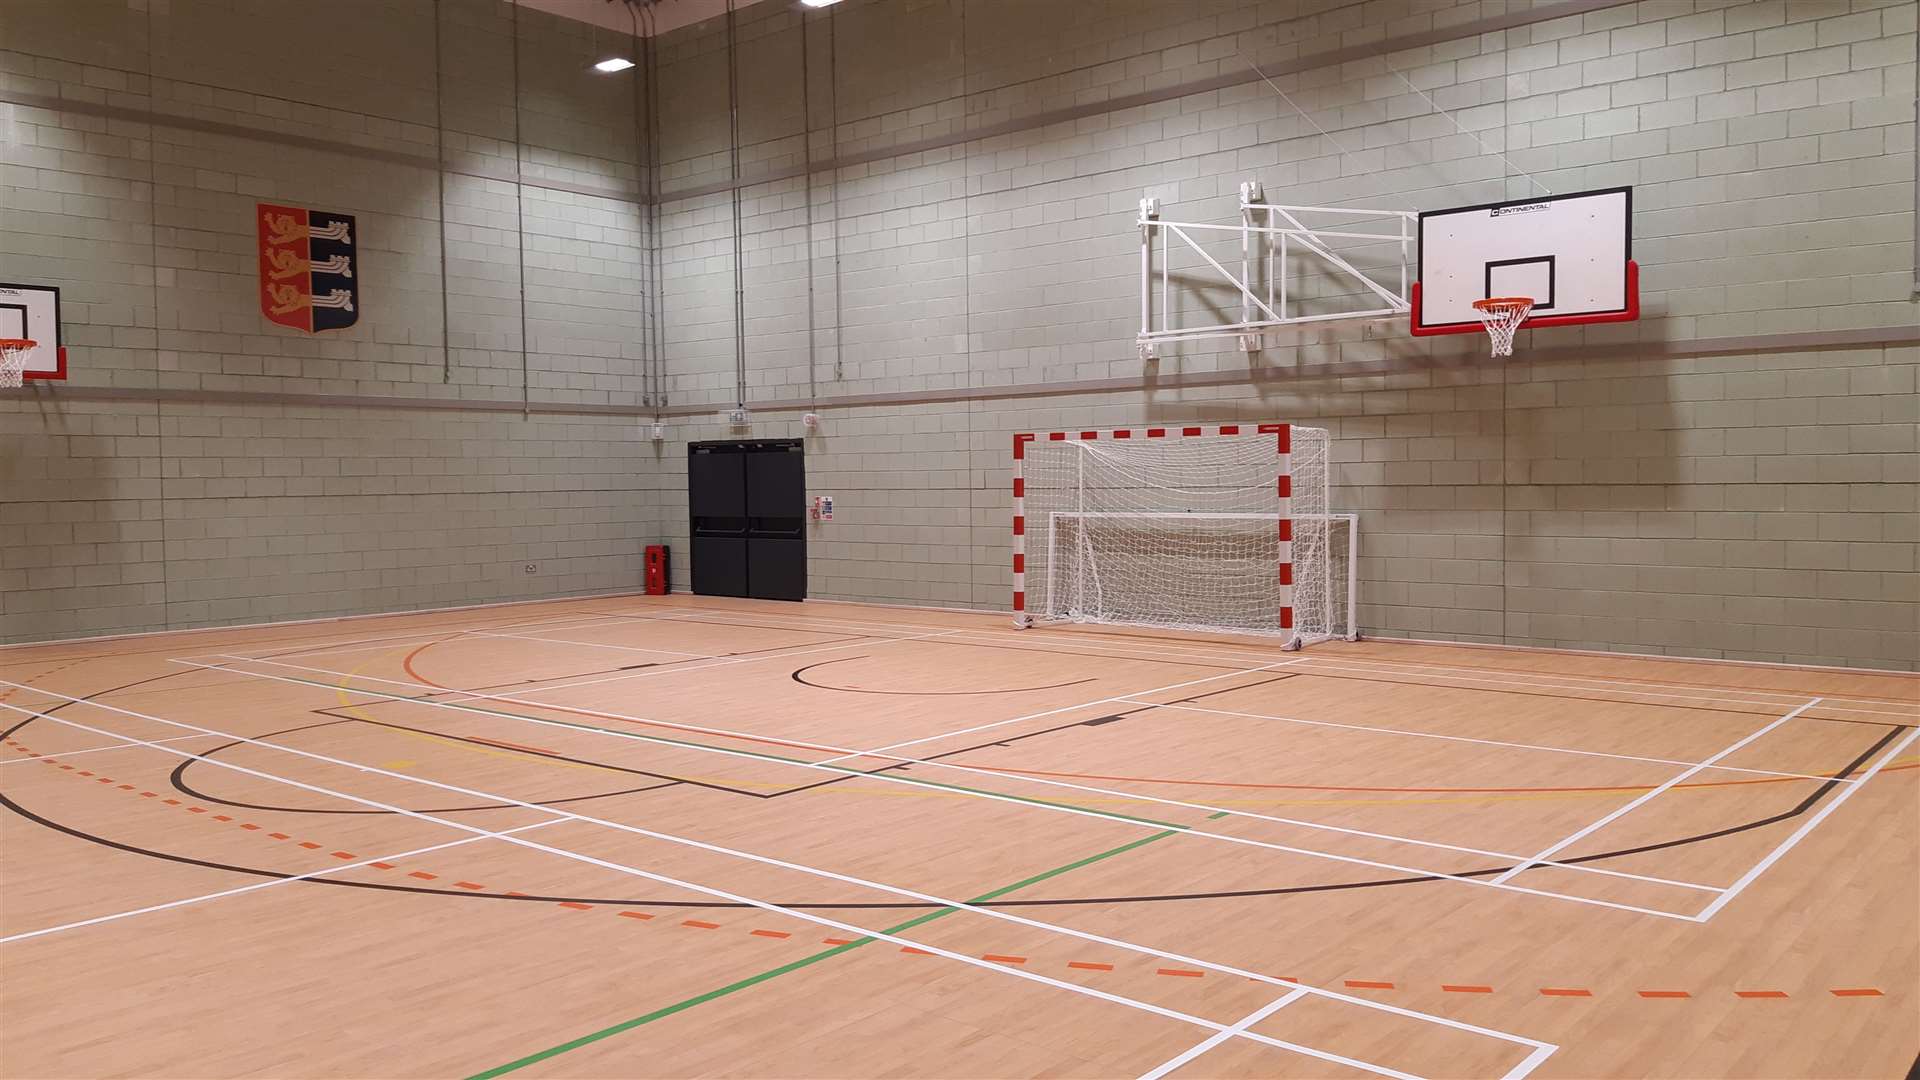 The new sports hall